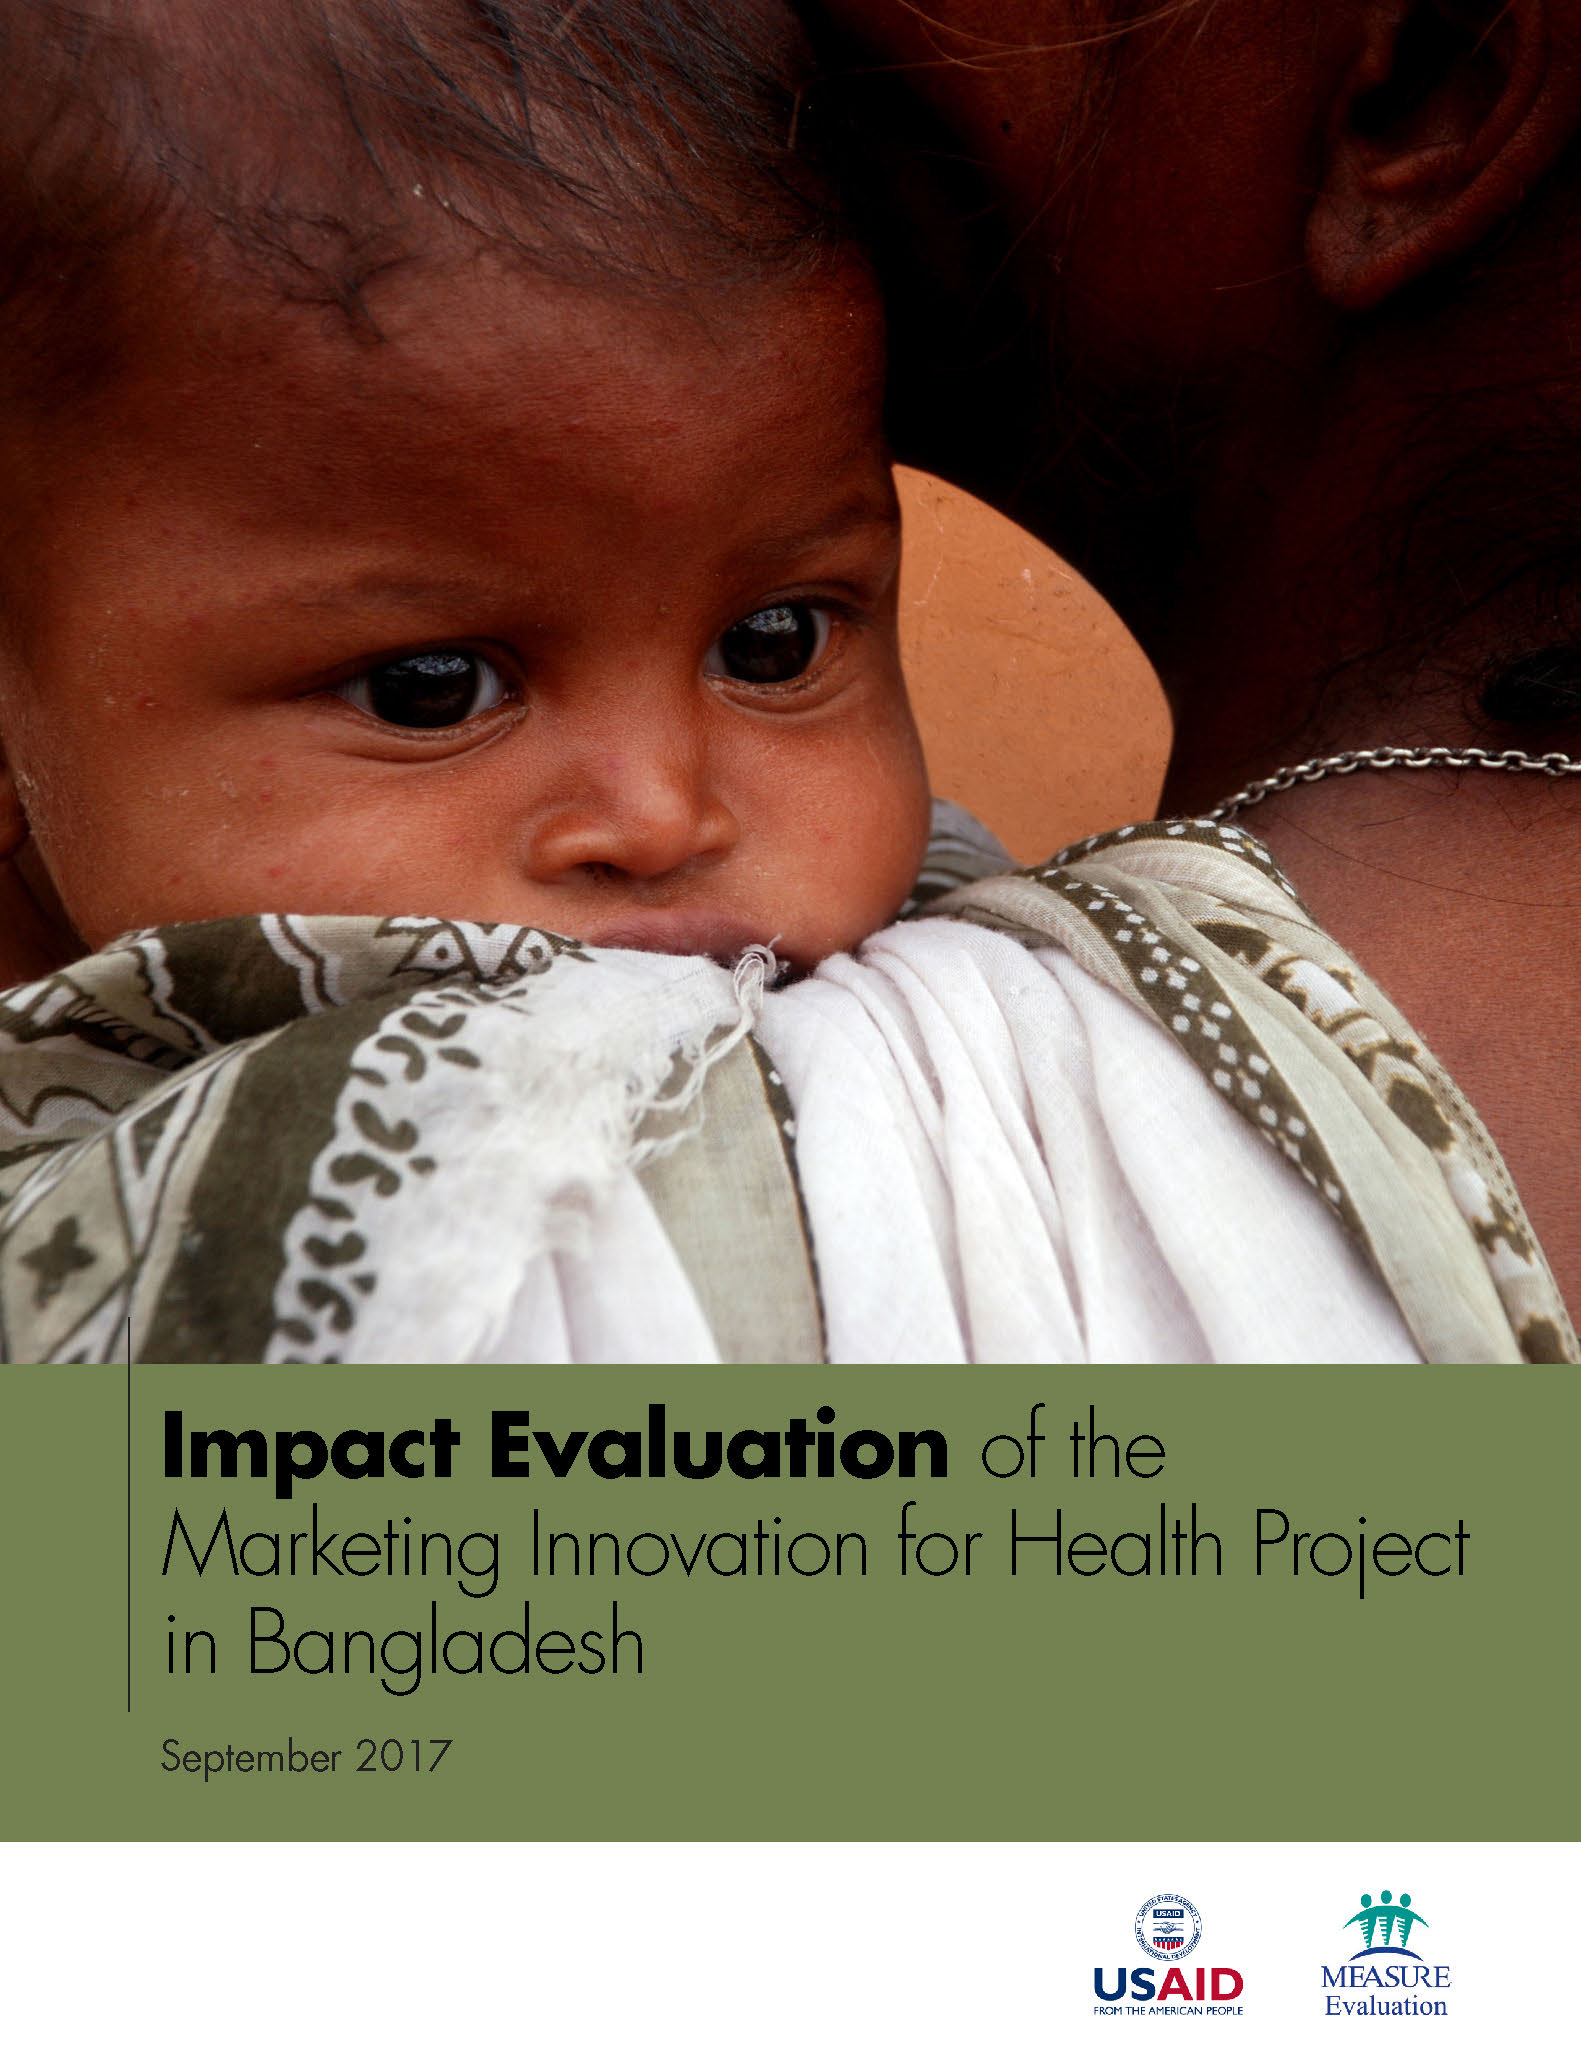 Impact Evaluation of the Marketing Innovation for Health Project in Bangladesh